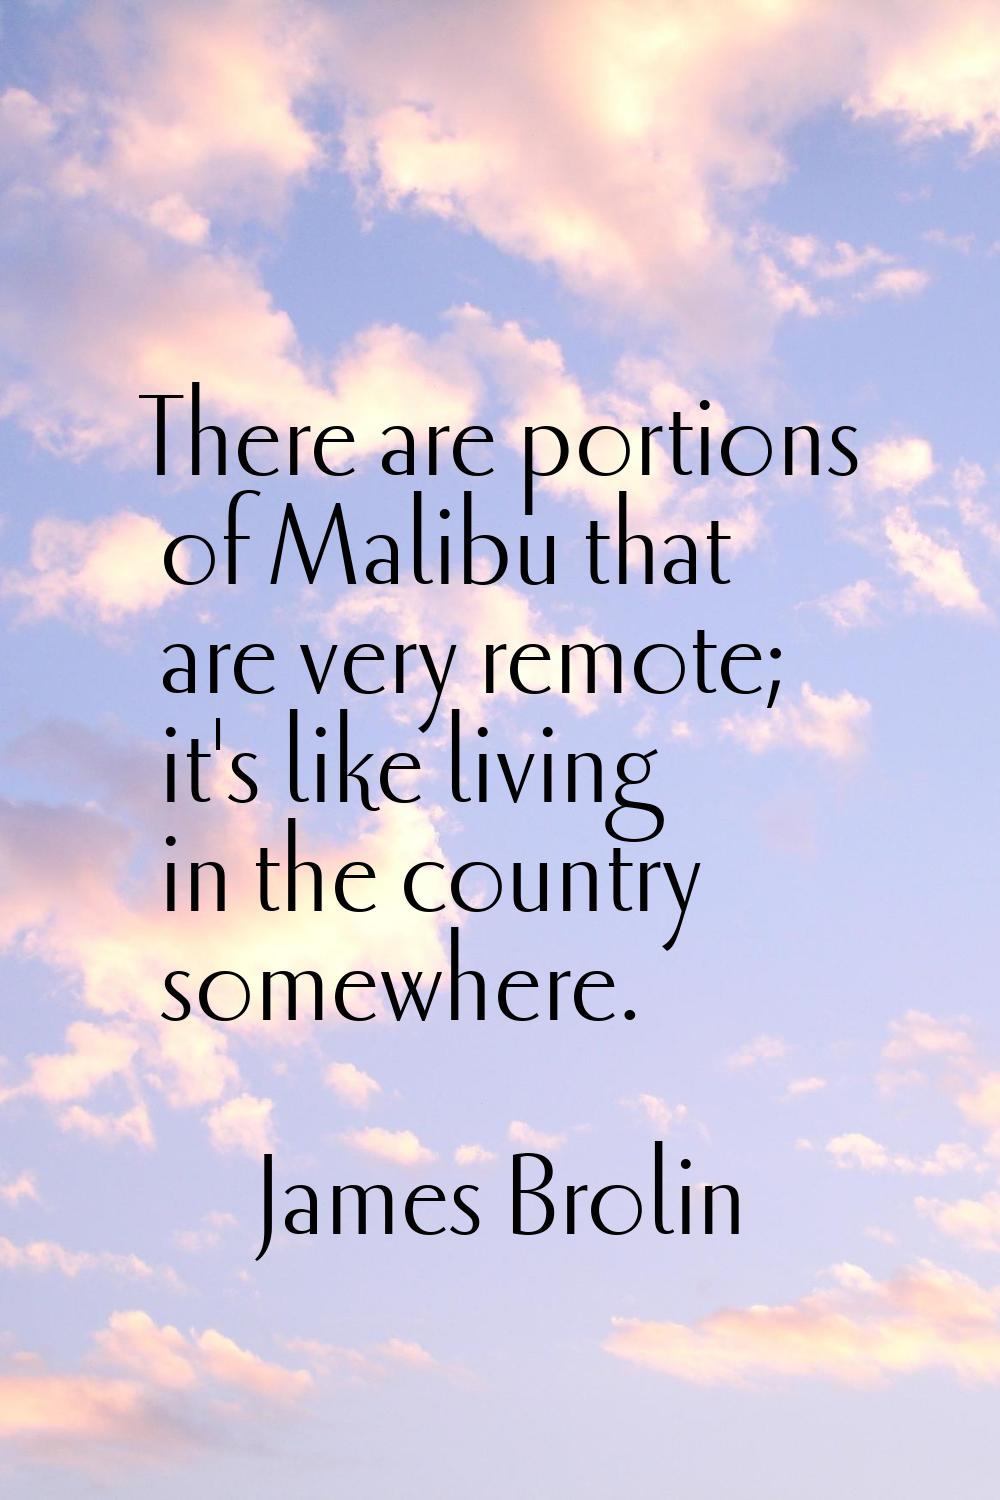 There are portions of Malibu that are very remote; it's like living in the country somewhere.